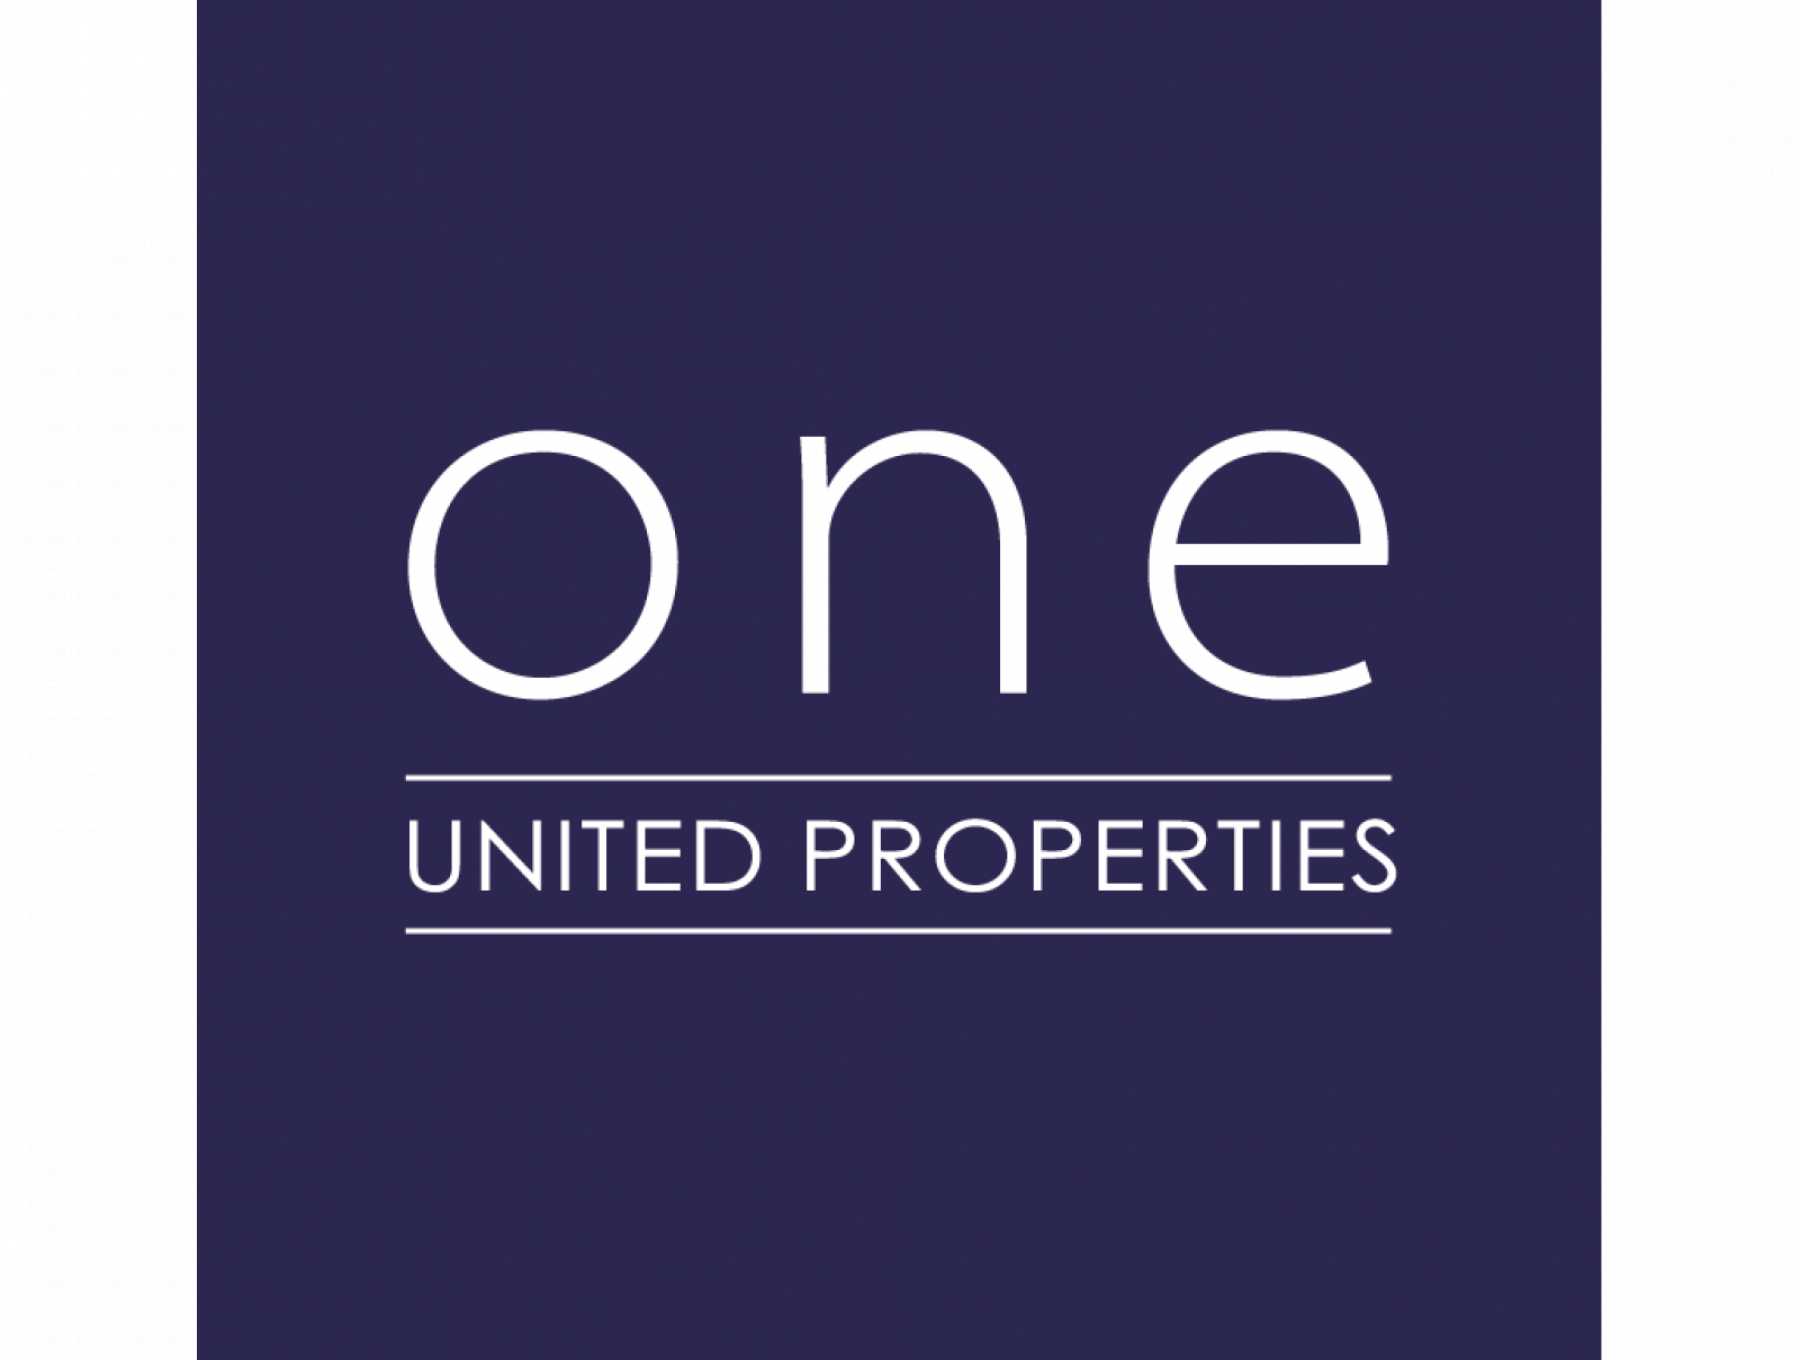 One United Properties in Romania’s 100 most valuable companies